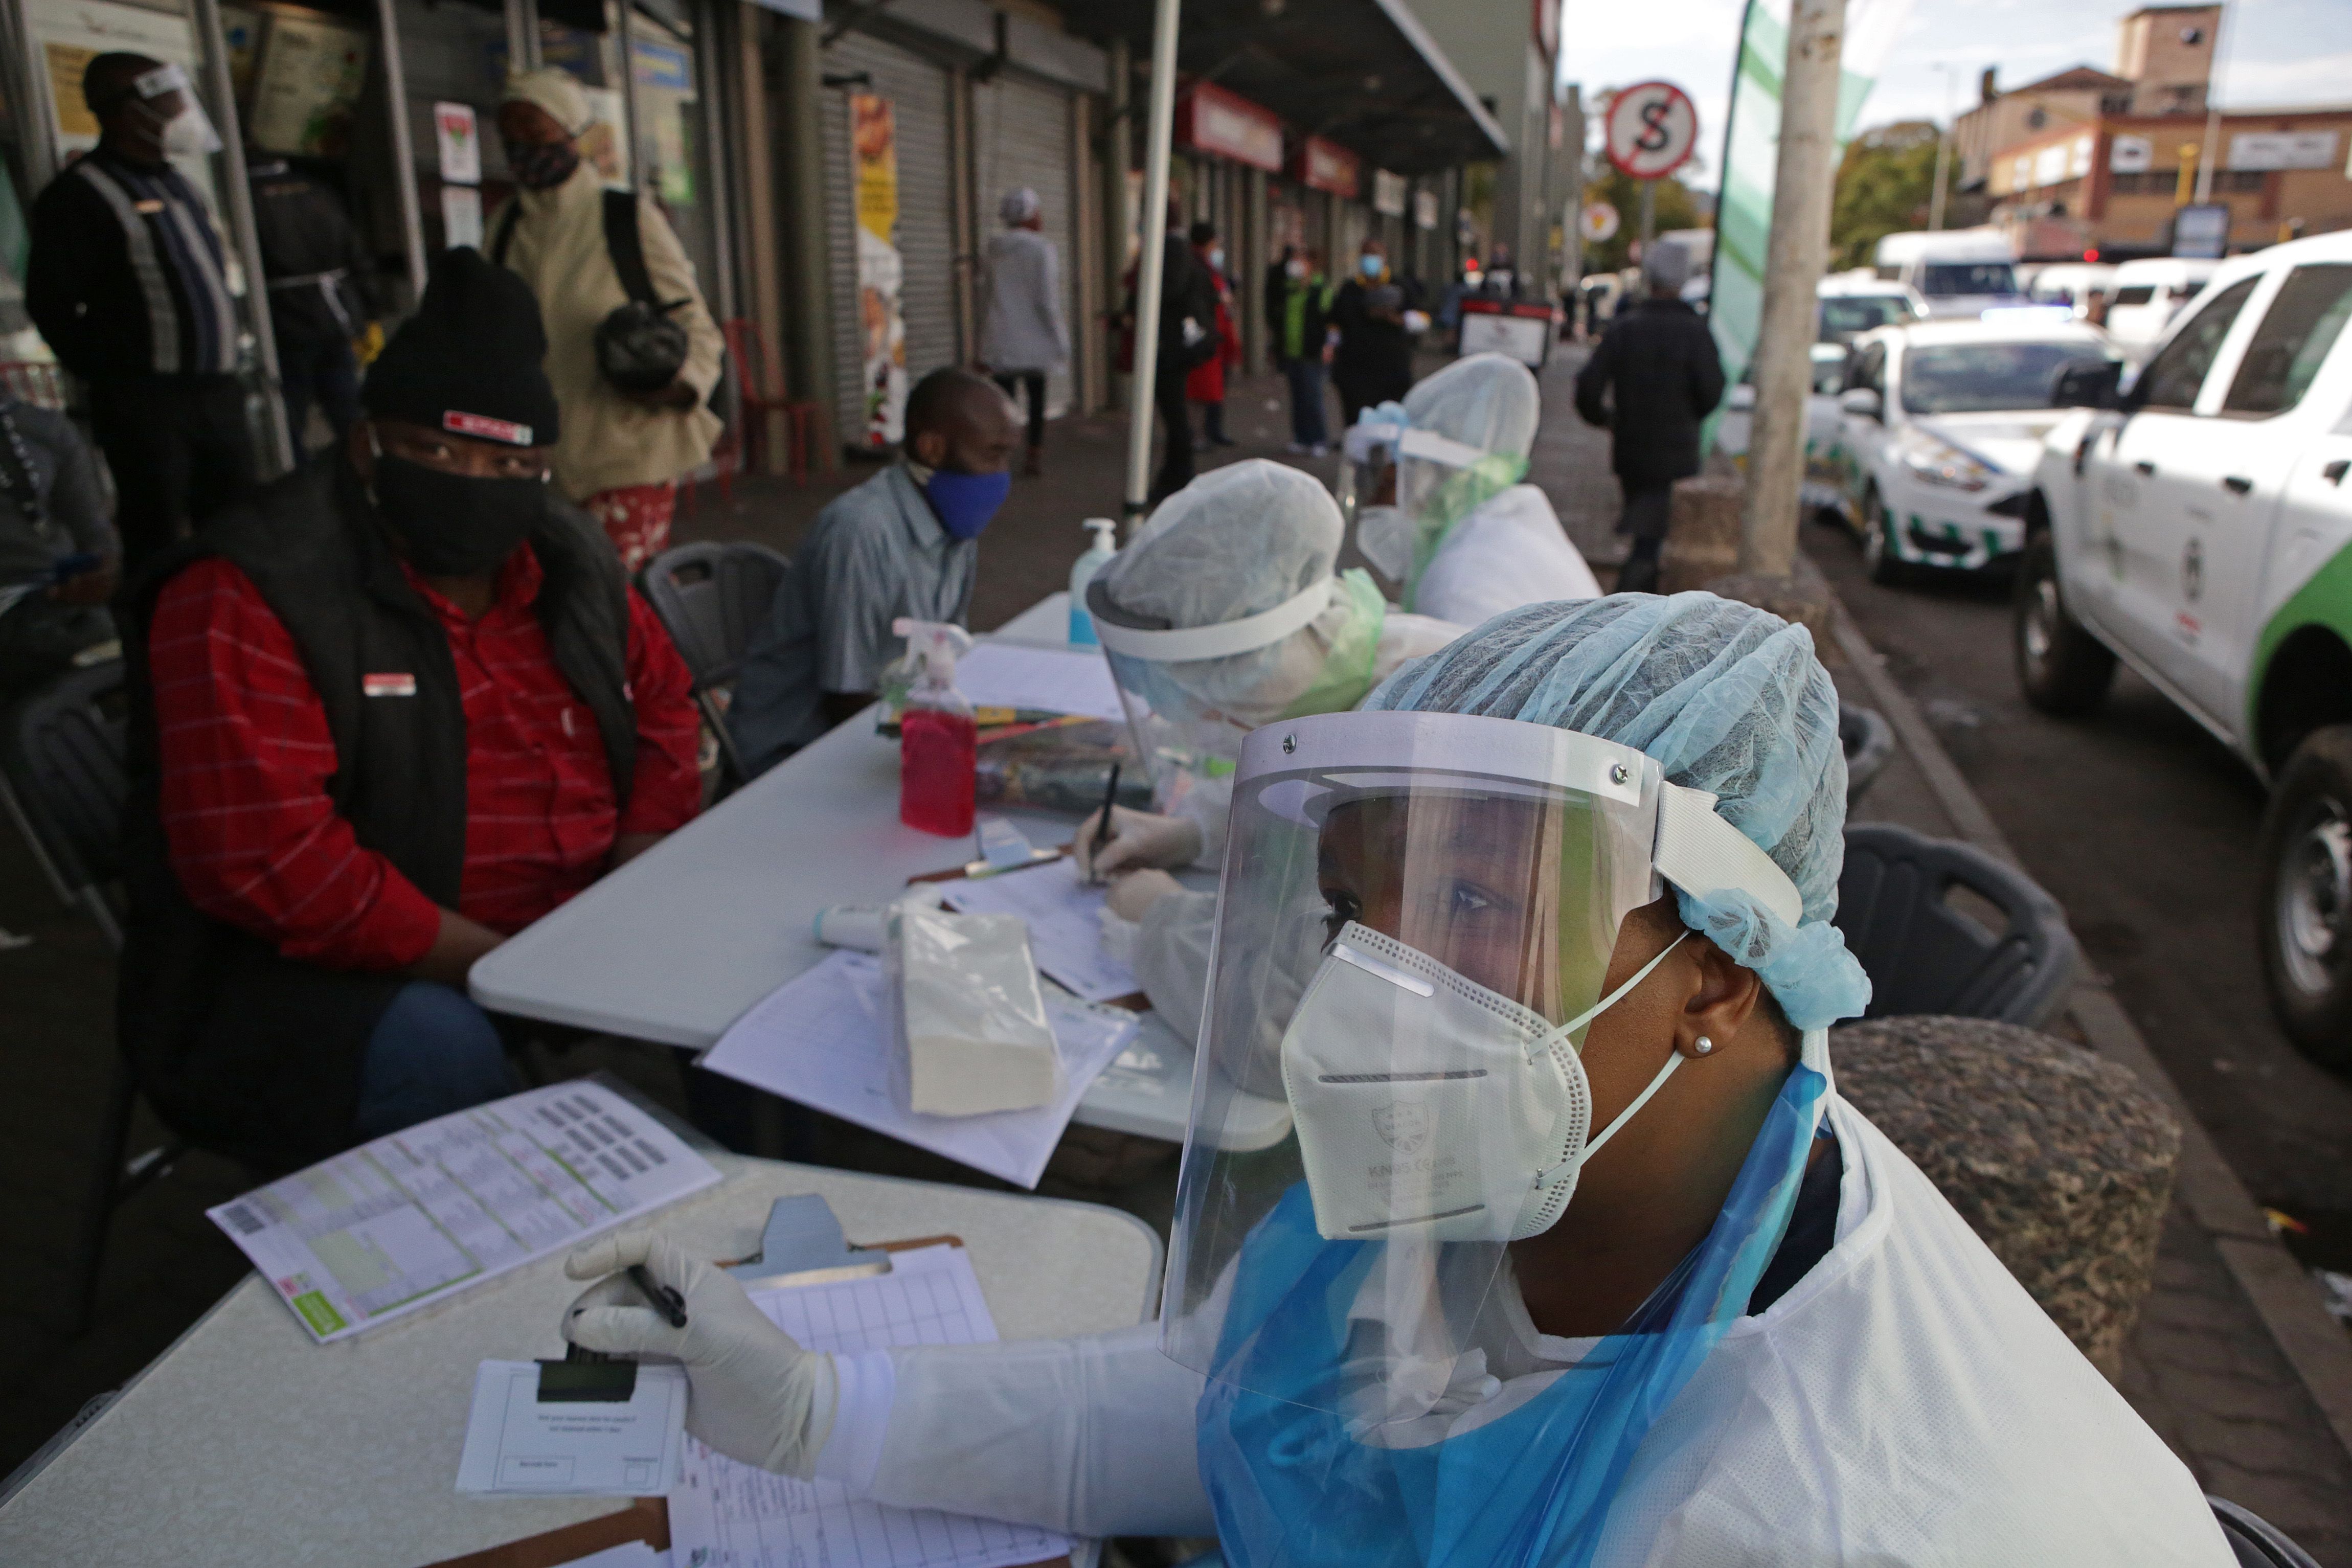 A City of Tshwane Health official testing for the COVID-19 coronavirus at the Bloed Street Mall in Pretoria Central Business District, on June 11